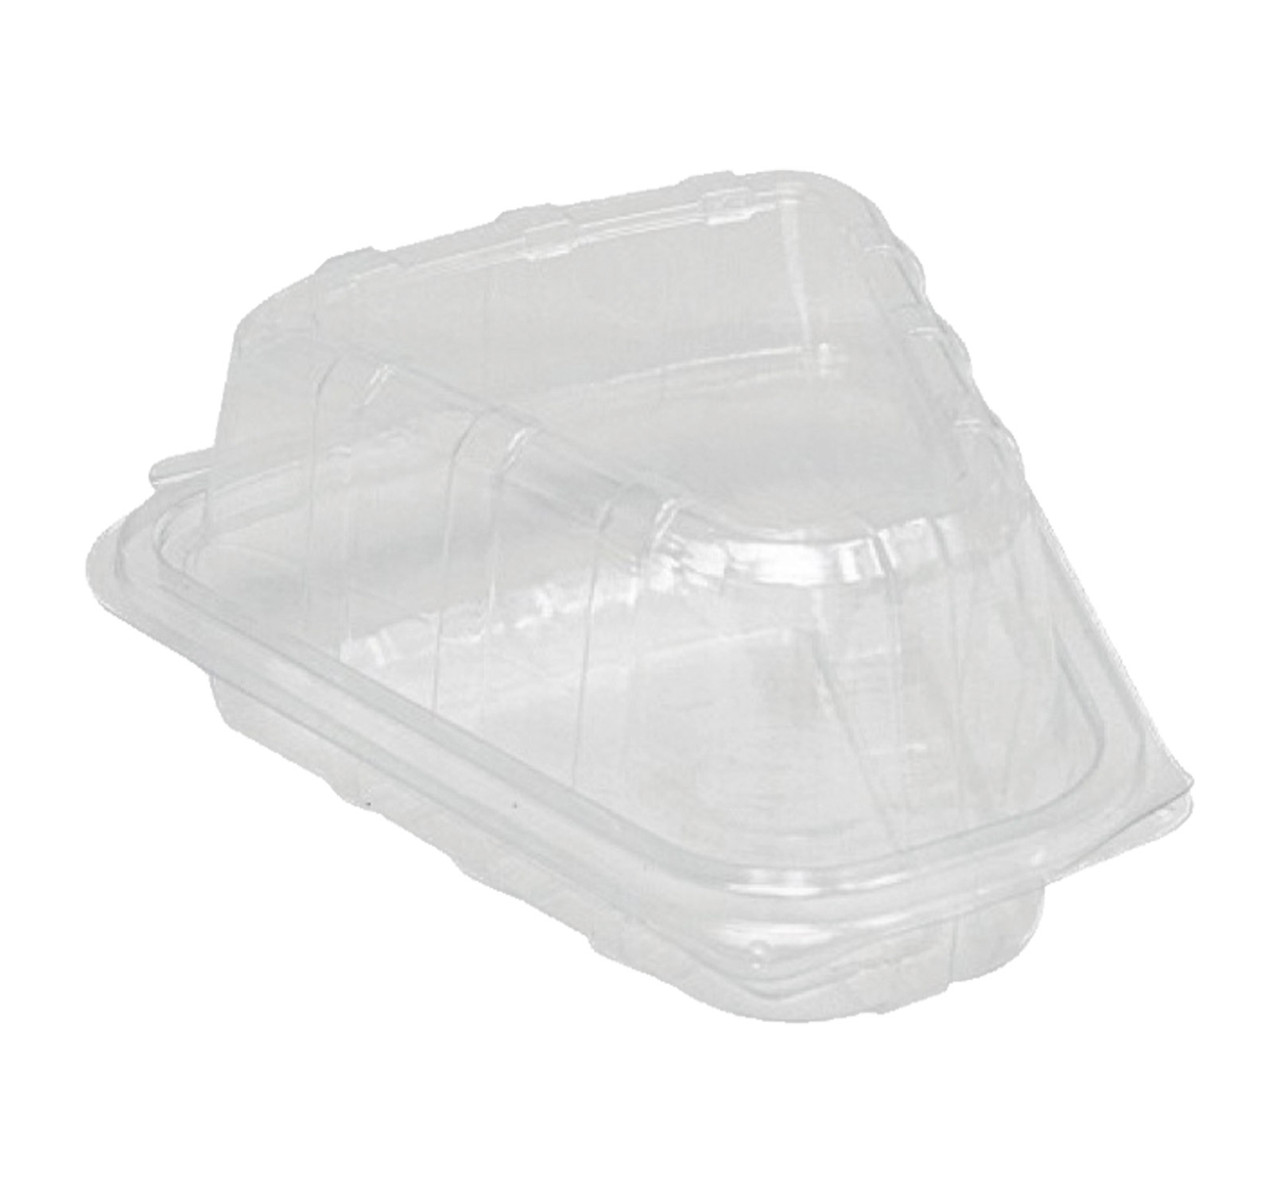 5 SLICE HINGED CONTAINER - 3 TALL - 250/CASE